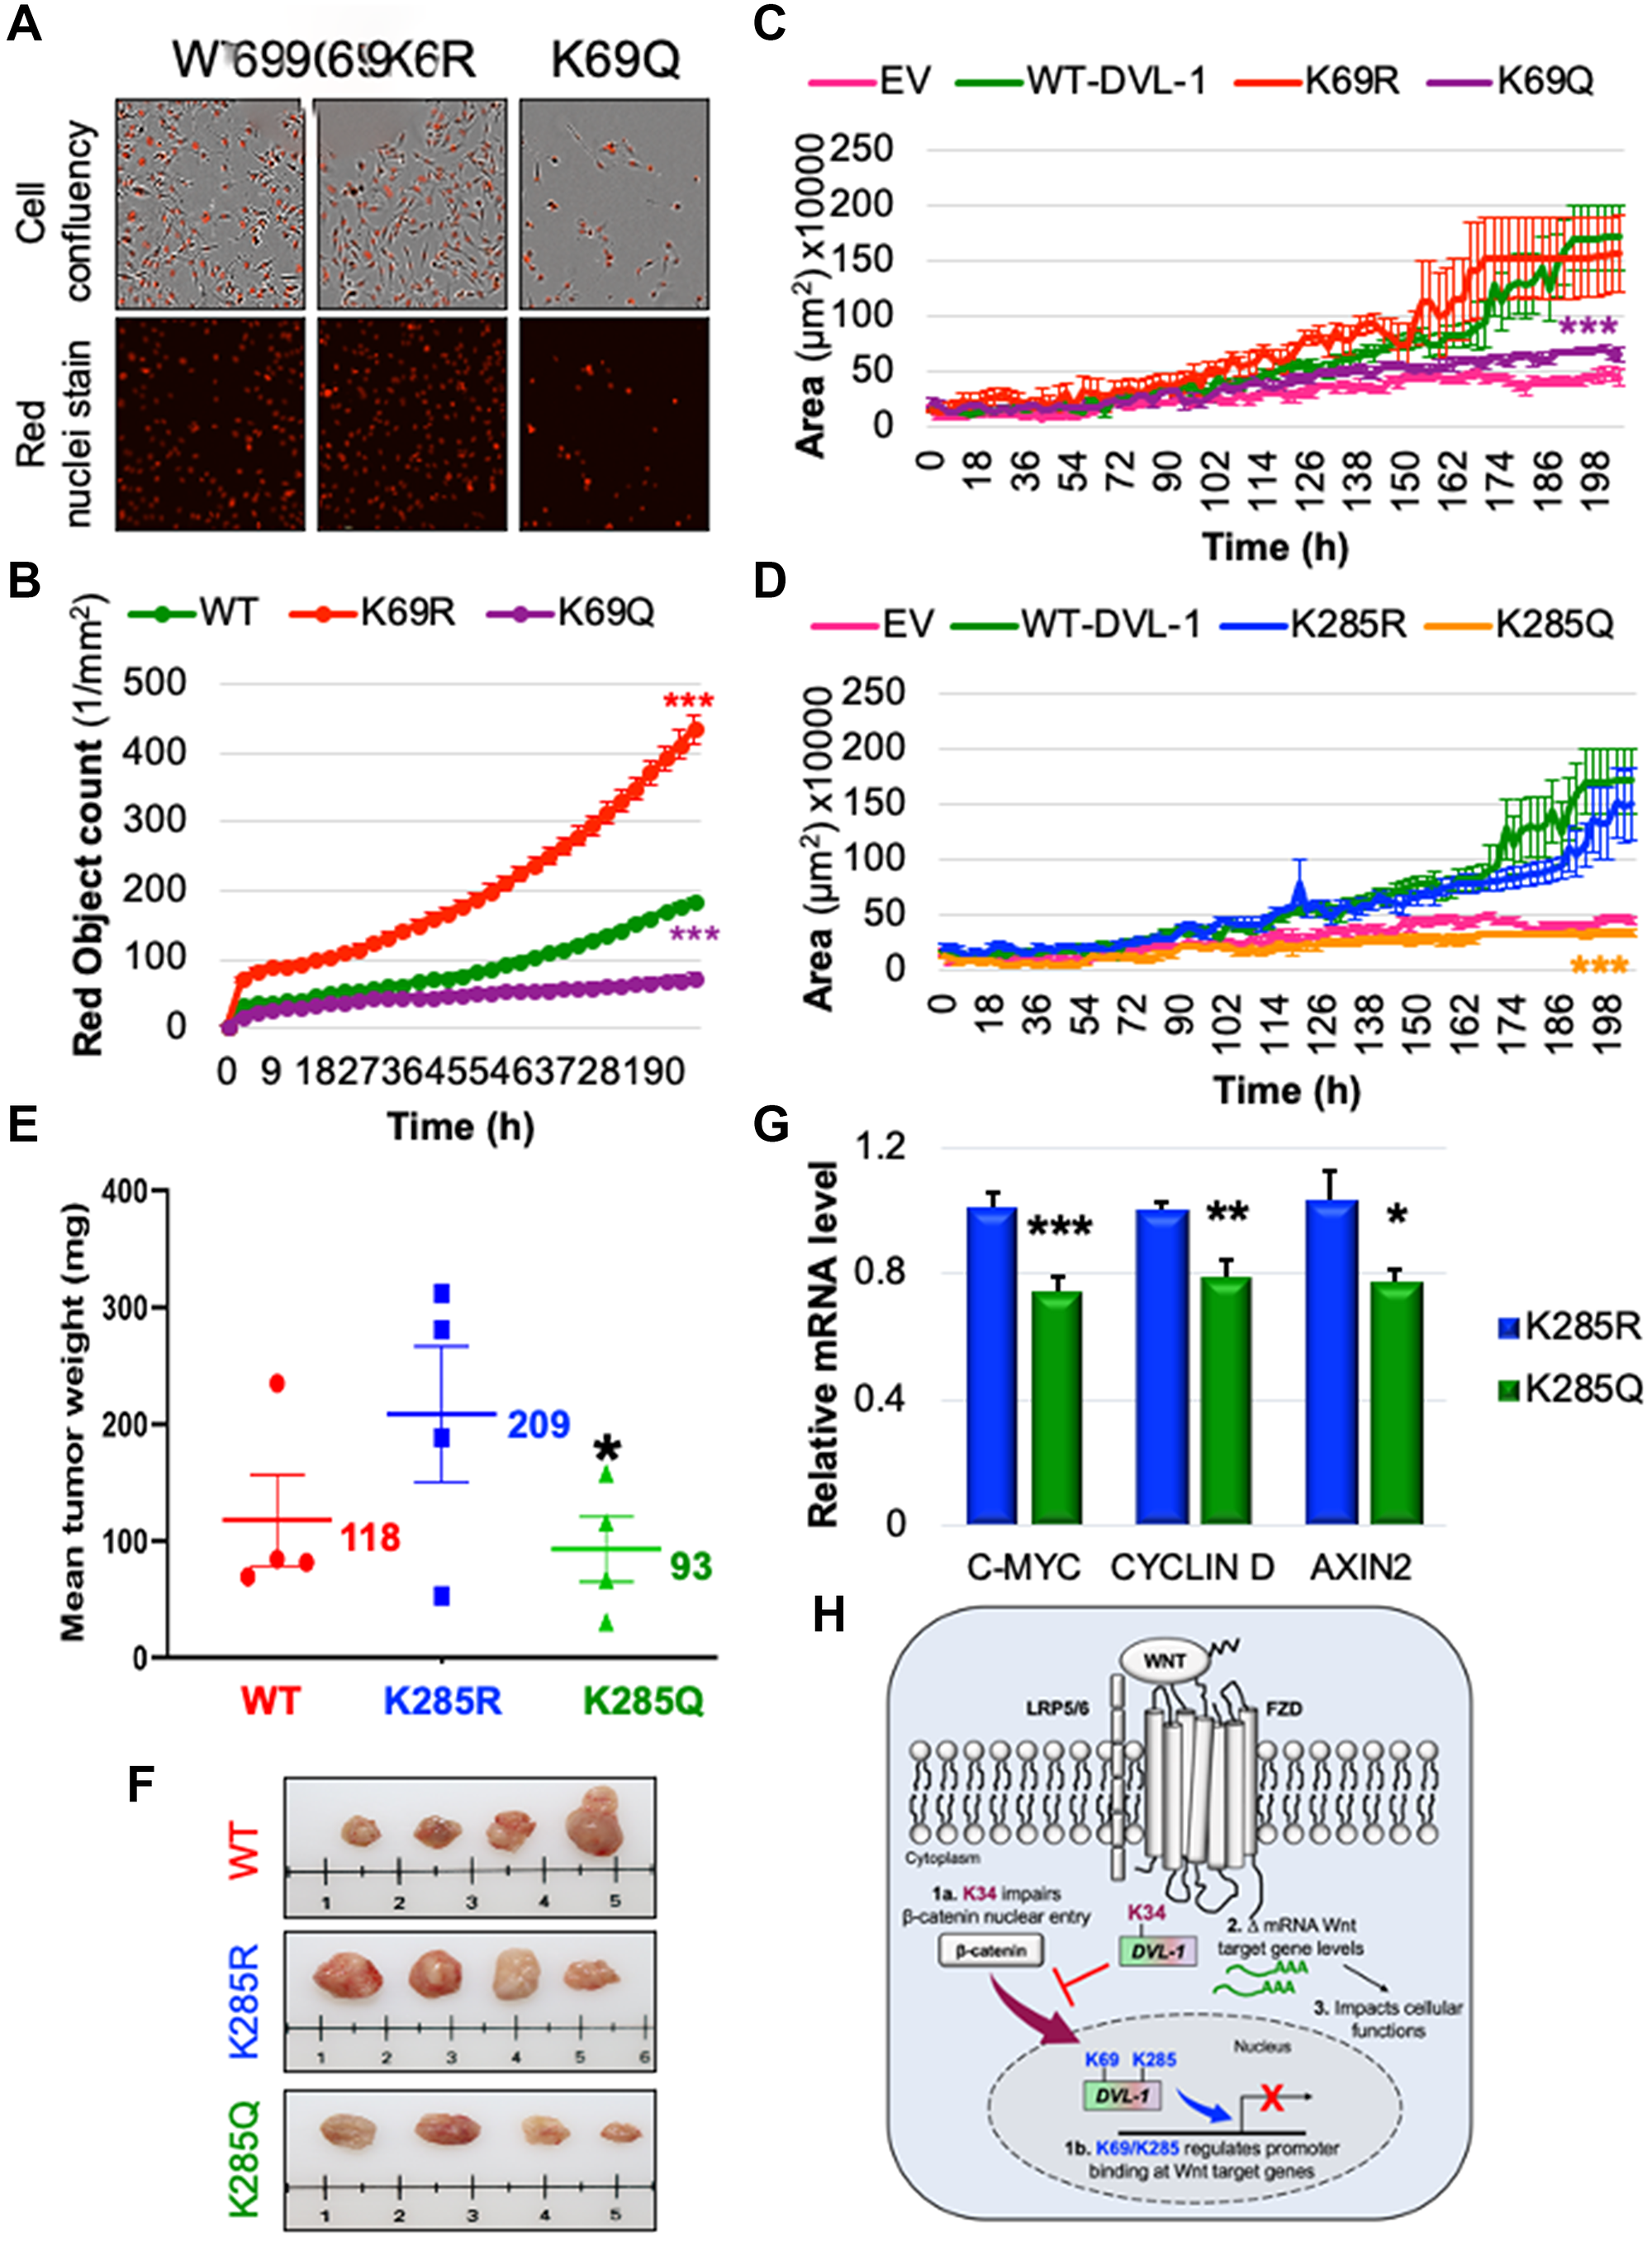 K69 and K285 residues significantly influence rate of cell proliferation and xenograft tumor growth respectively in MDA-MB-231 cells.